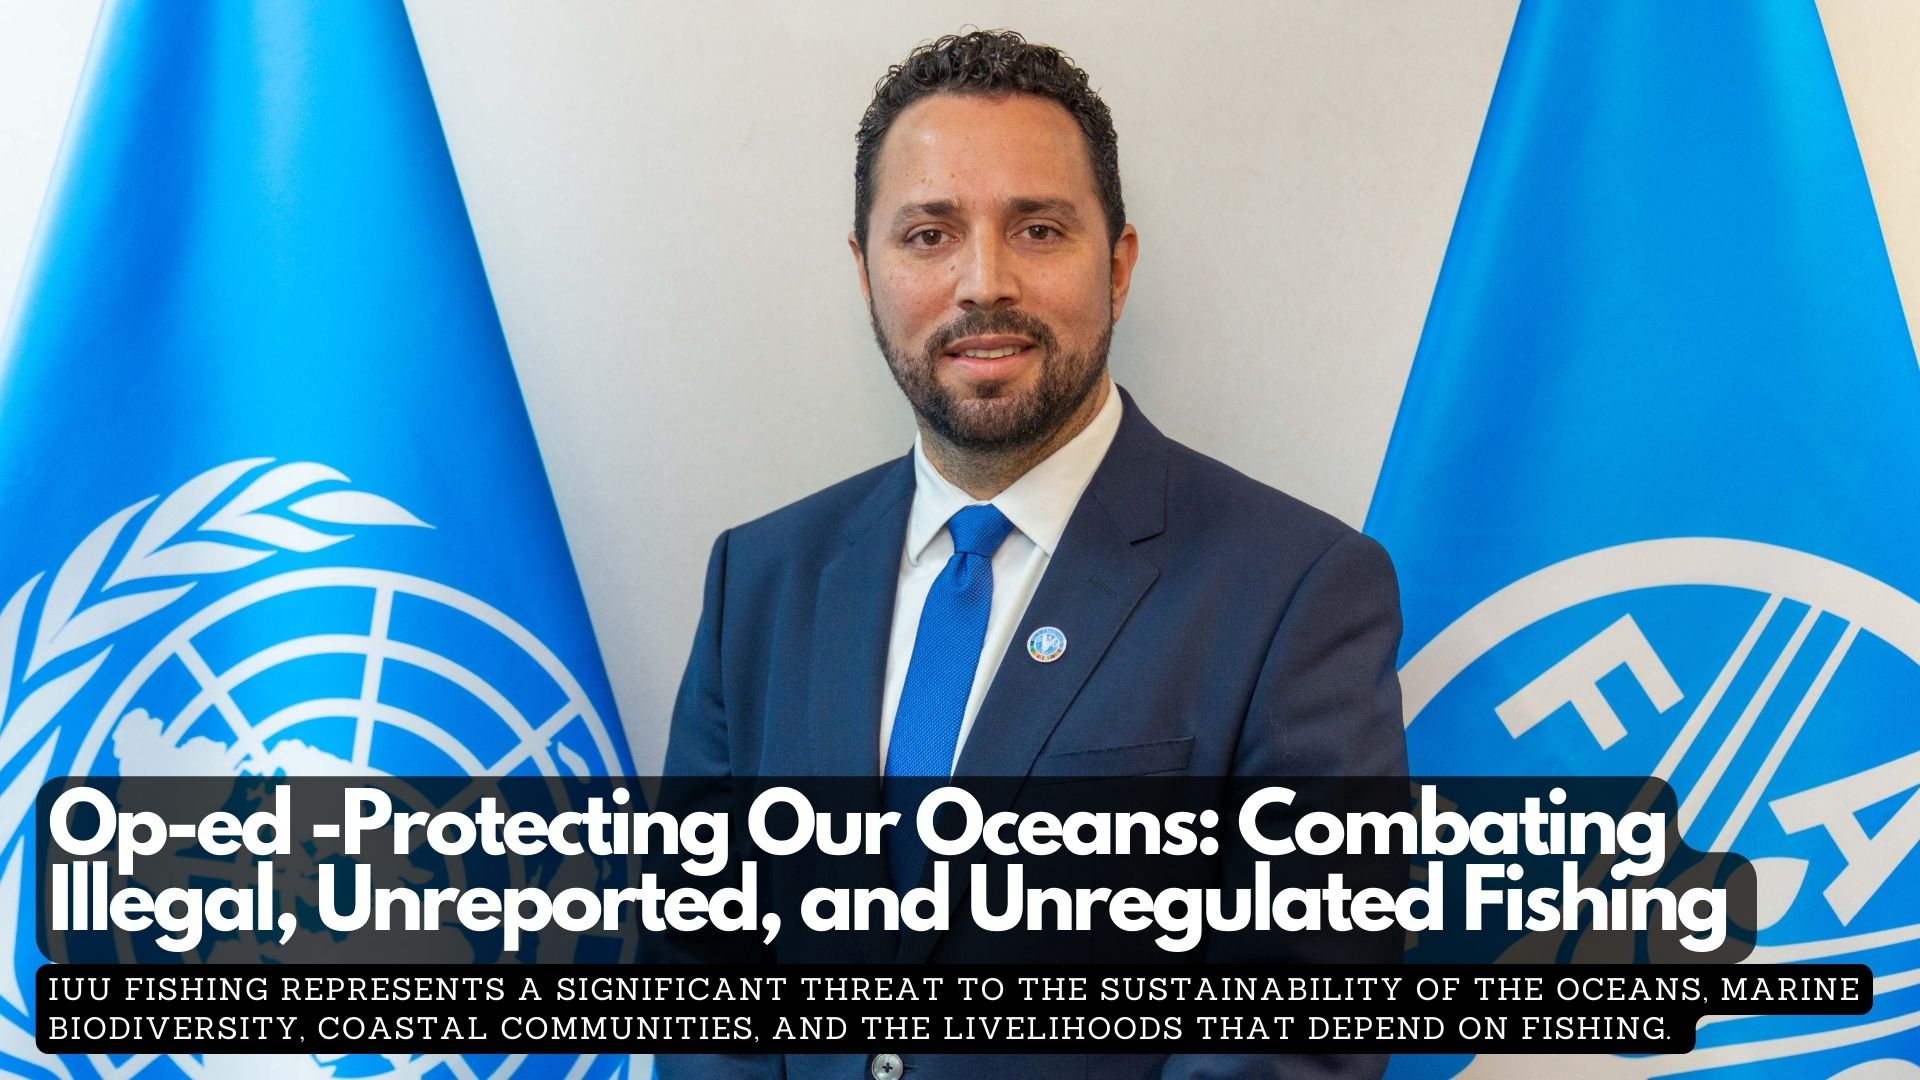 Op-ed -Protecting Our Oceans: Combating Illegal, Unreported, and Unregulated Fishing